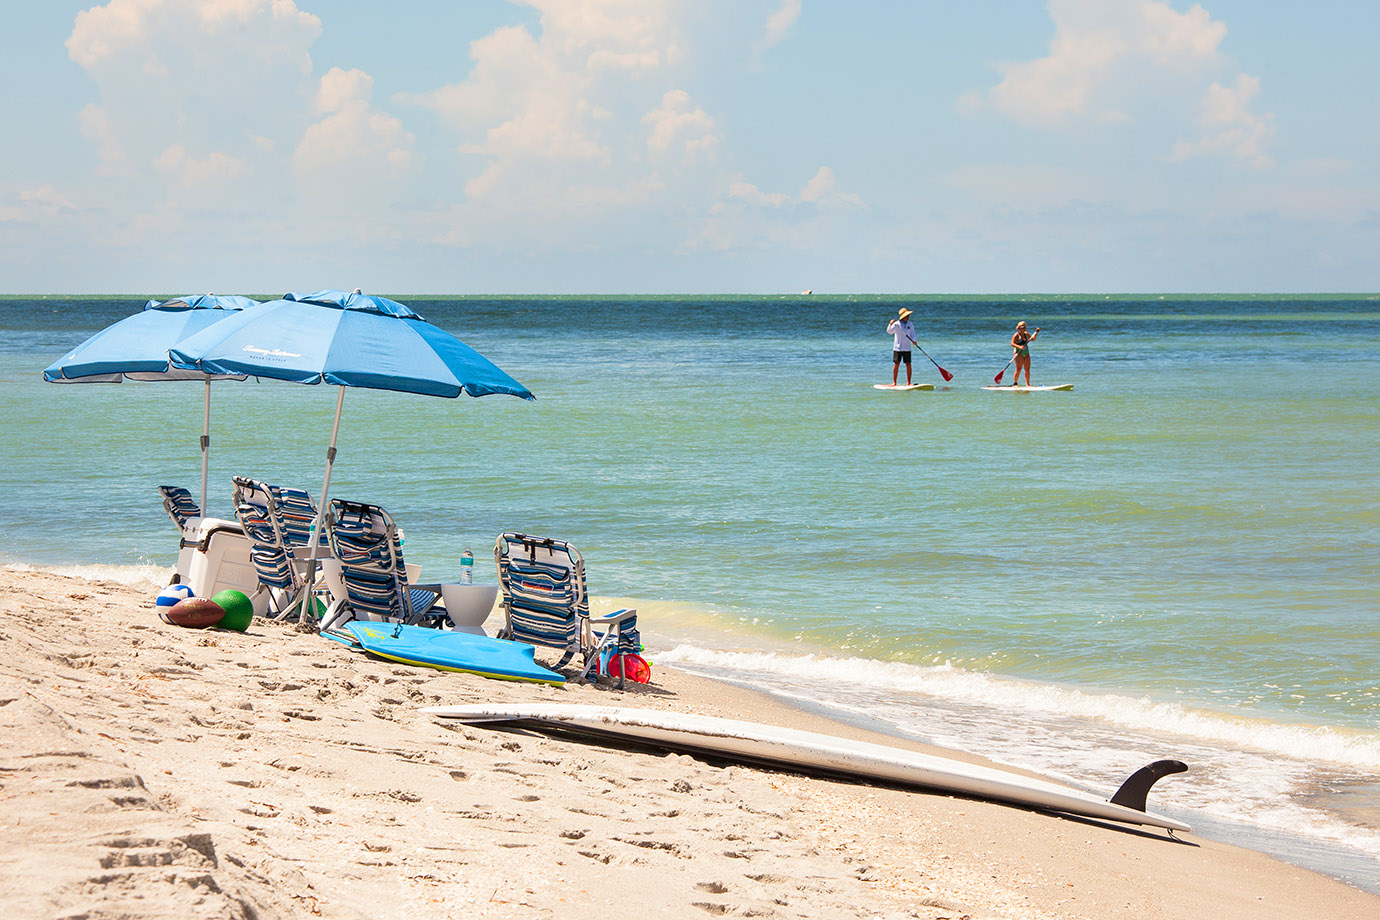 Shore line in Captiva Island, FL with five beach chairs and two umbrellas white two people paddle board in the ocean in the distance